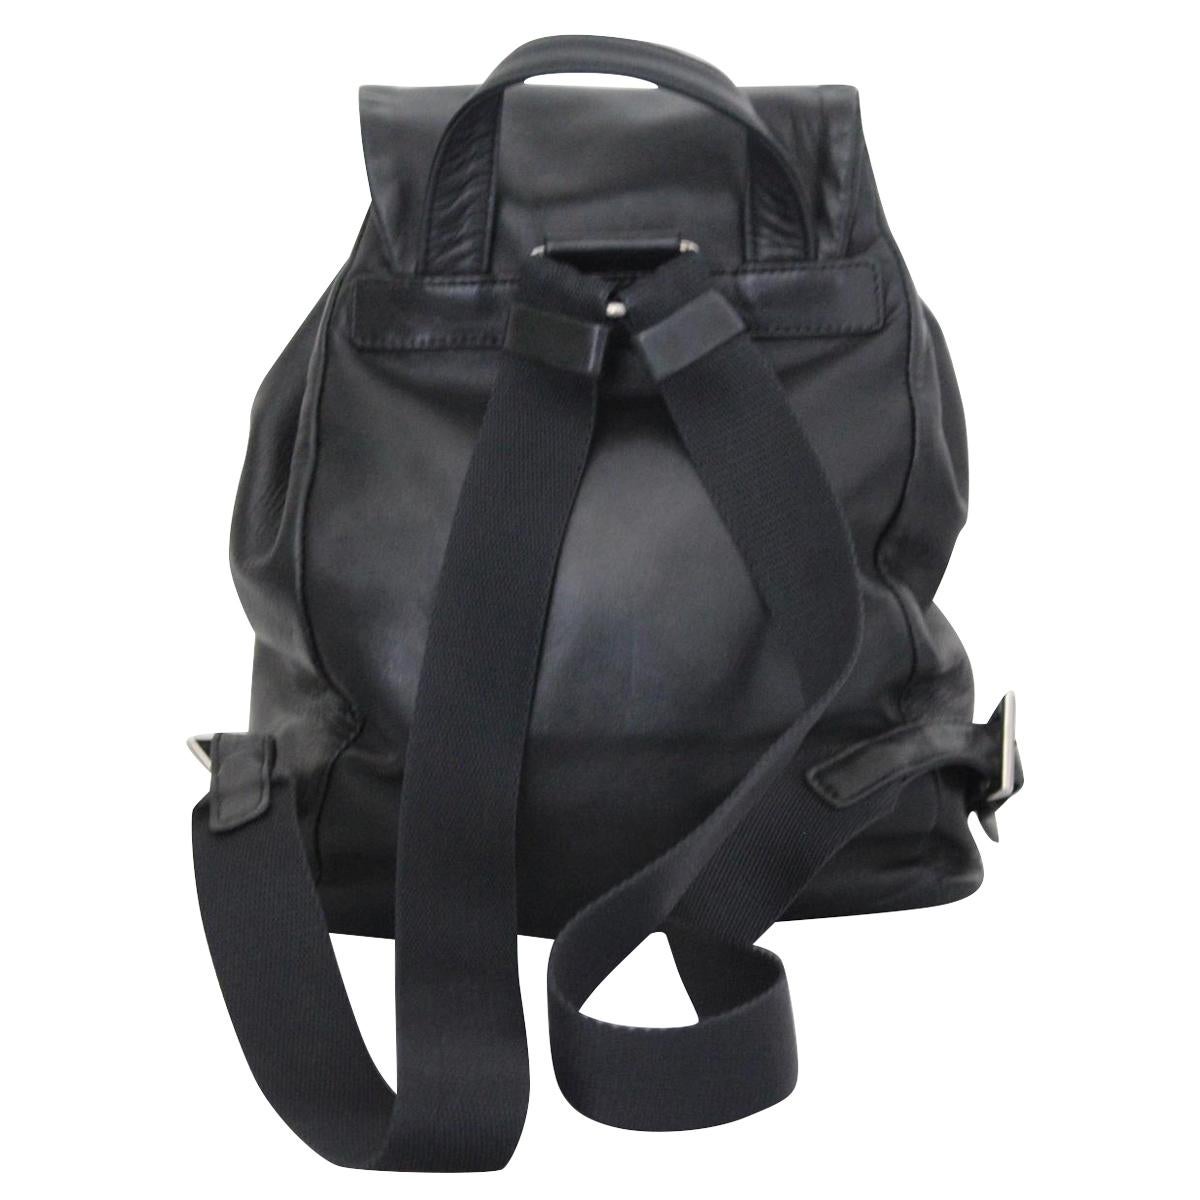 Super quality Prada backpack
YSupersoft leather
Black color
Metal inserts
Buckle closure
Internal zip pocket
Cm 20 x 26 x 15 (7.8 x 10.2 x 5.9 inches)
Original price € 1550
Worldwide express shipping included in the price !